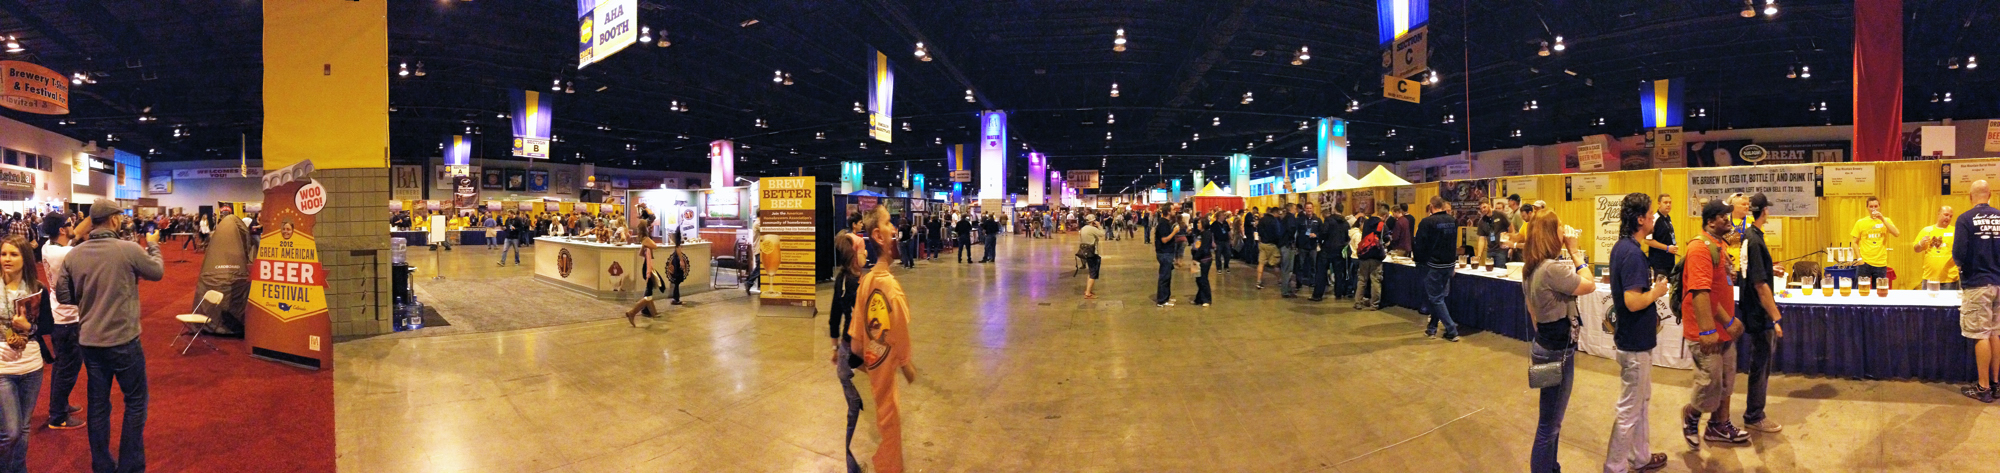 The Great American Beer Festival 2012